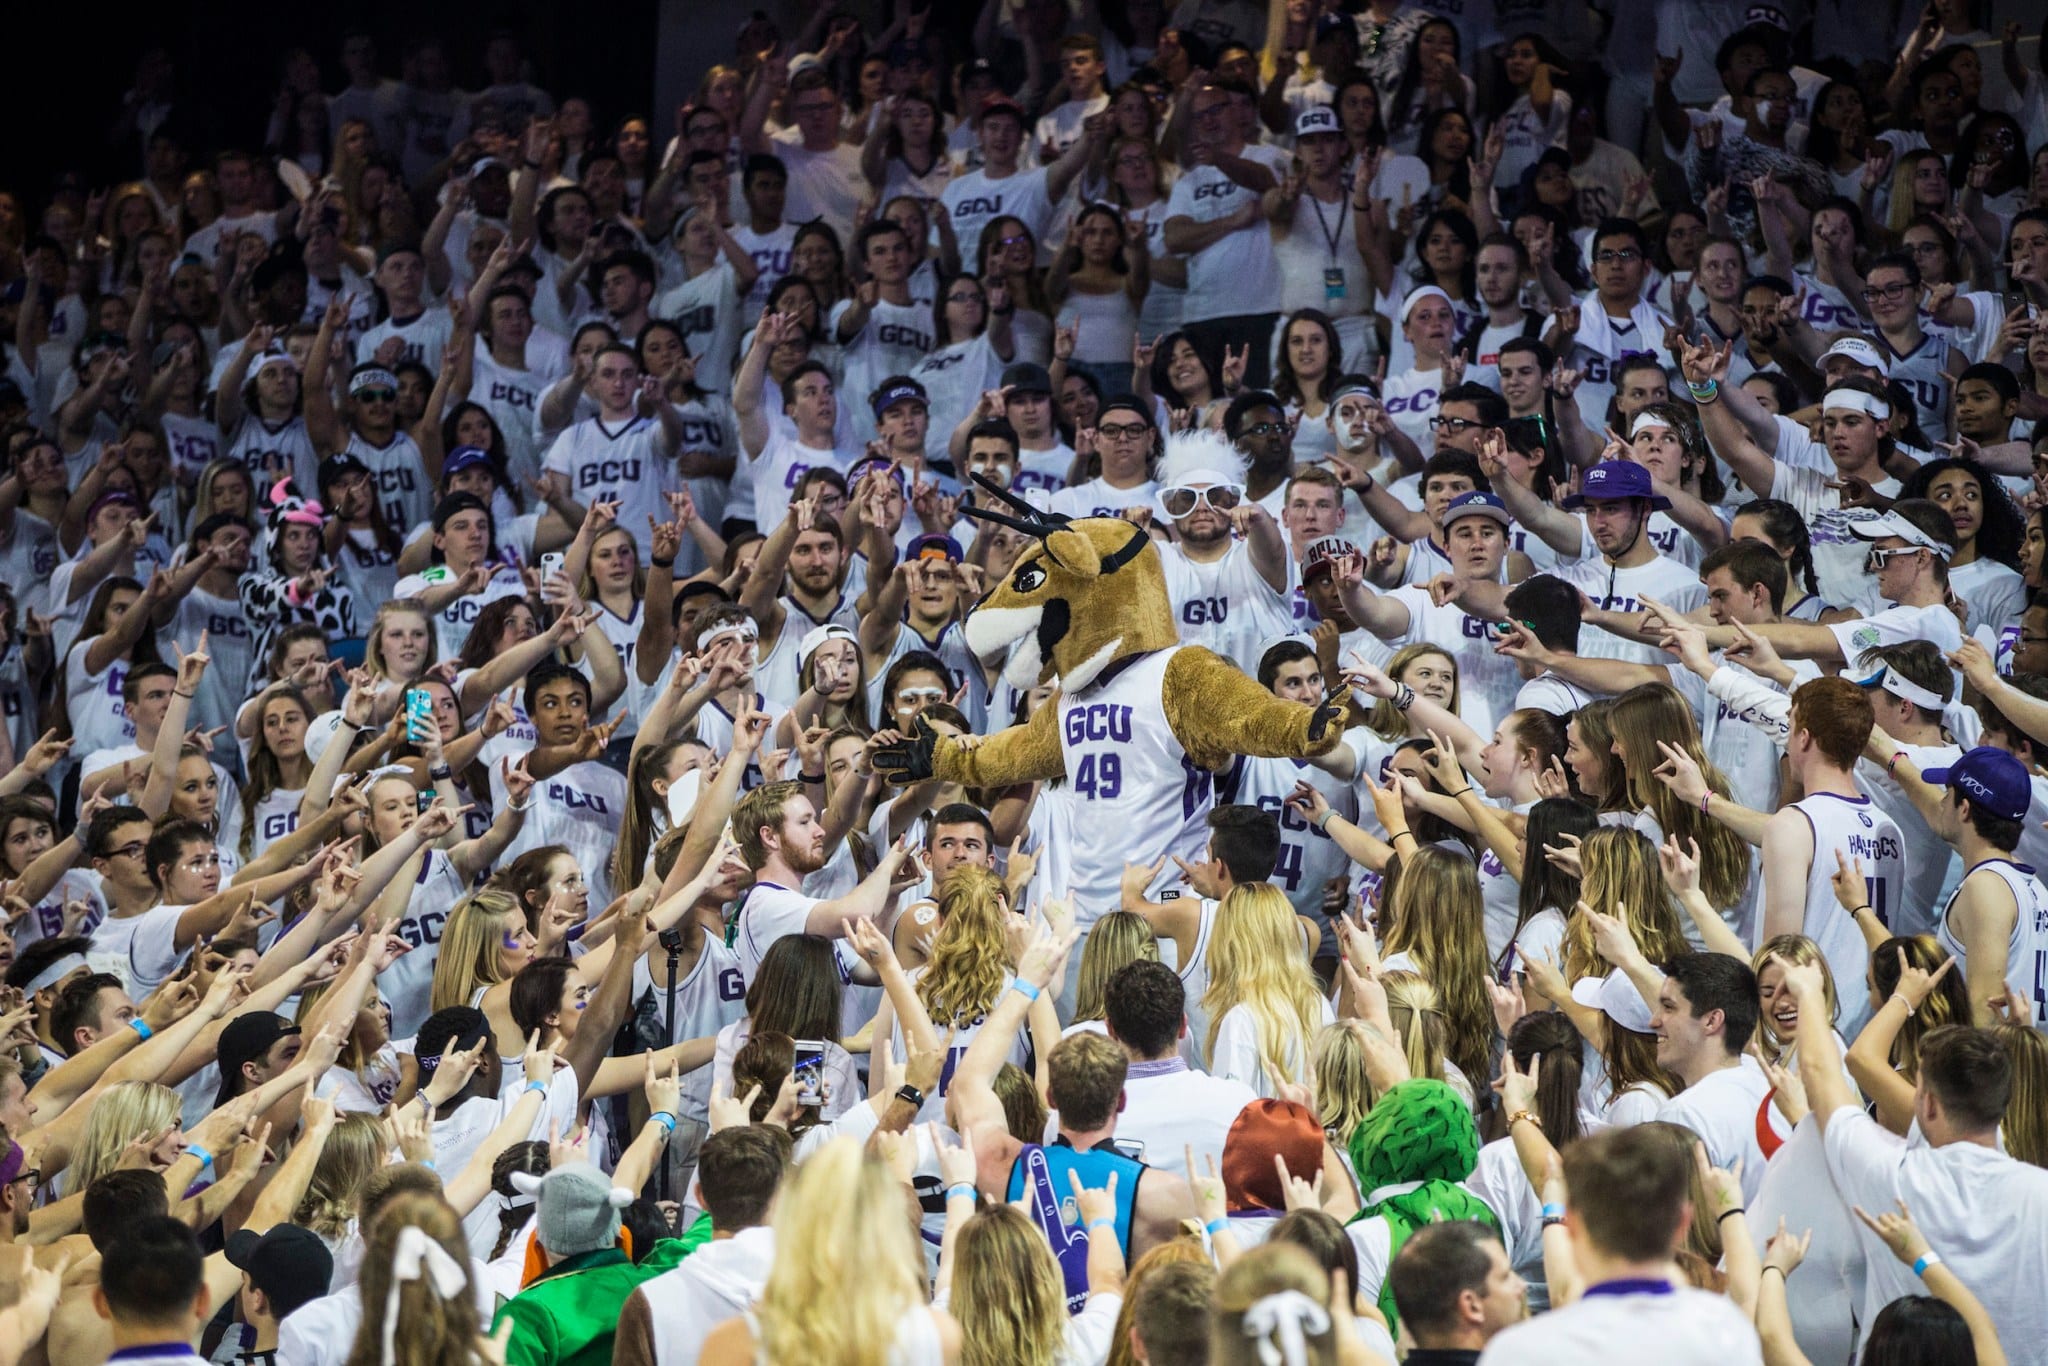 GCU student section packed at a basketball game, fans surrounding the school mascot in the stands, creating an exciting and spirited atmosphere.